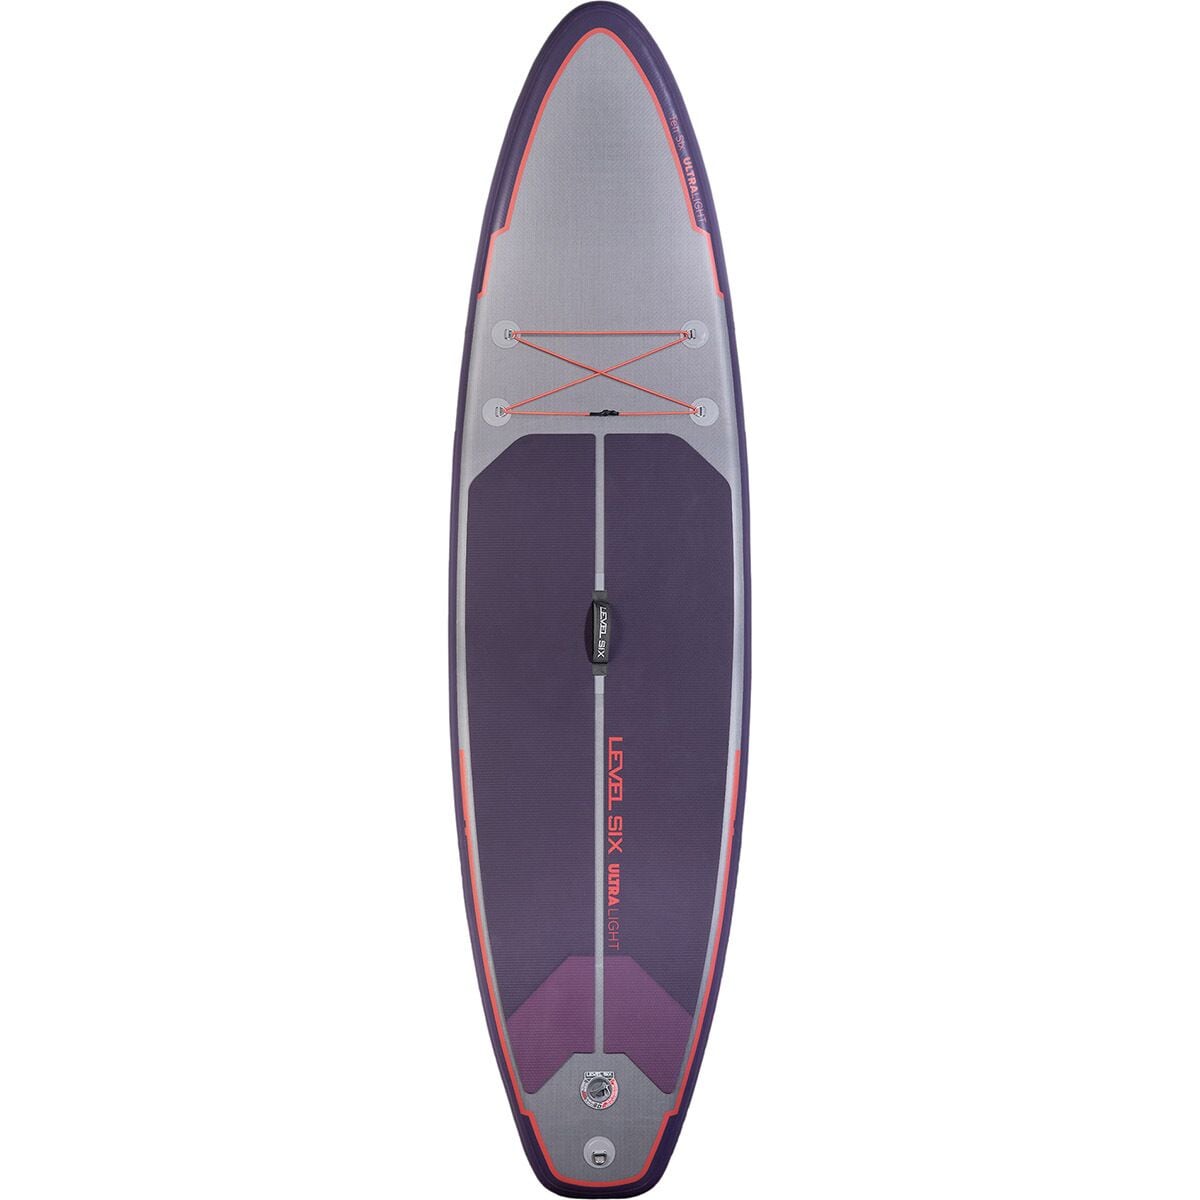 Level 6 UL Inflatable Stand-Up Paddleboard